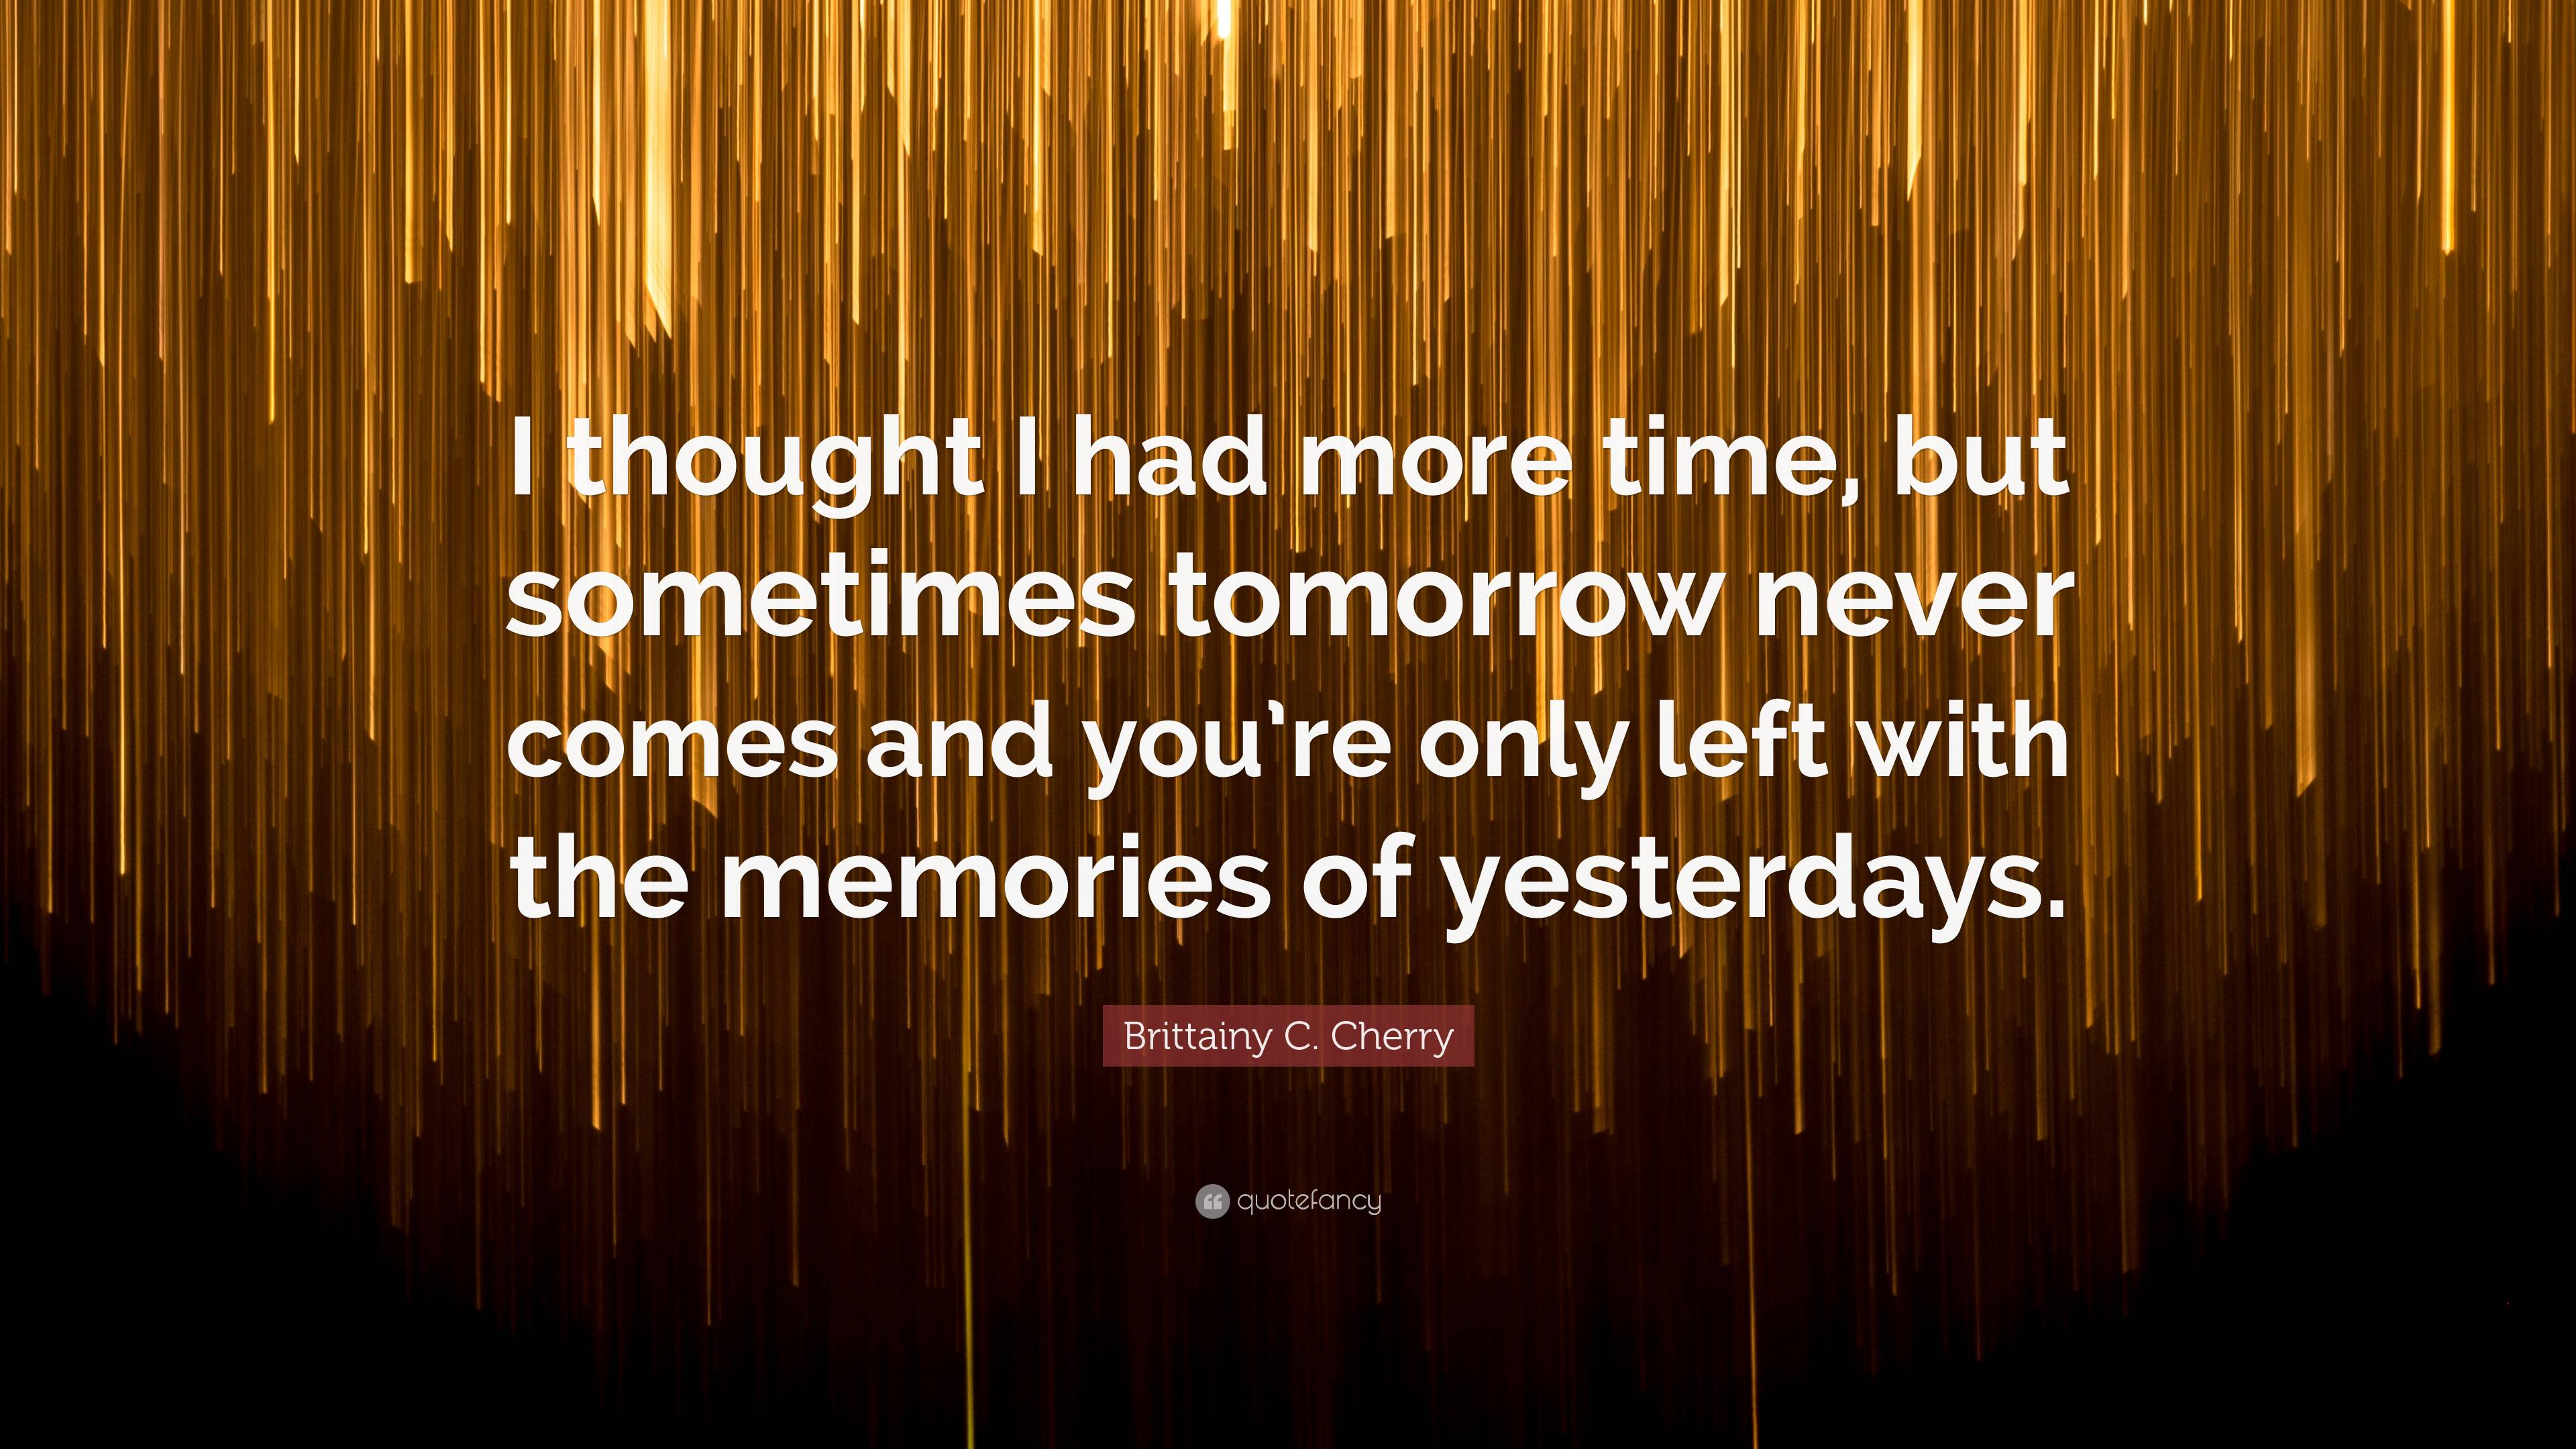 Brittainy C. Cherry Quote: “I thought I had more time, but